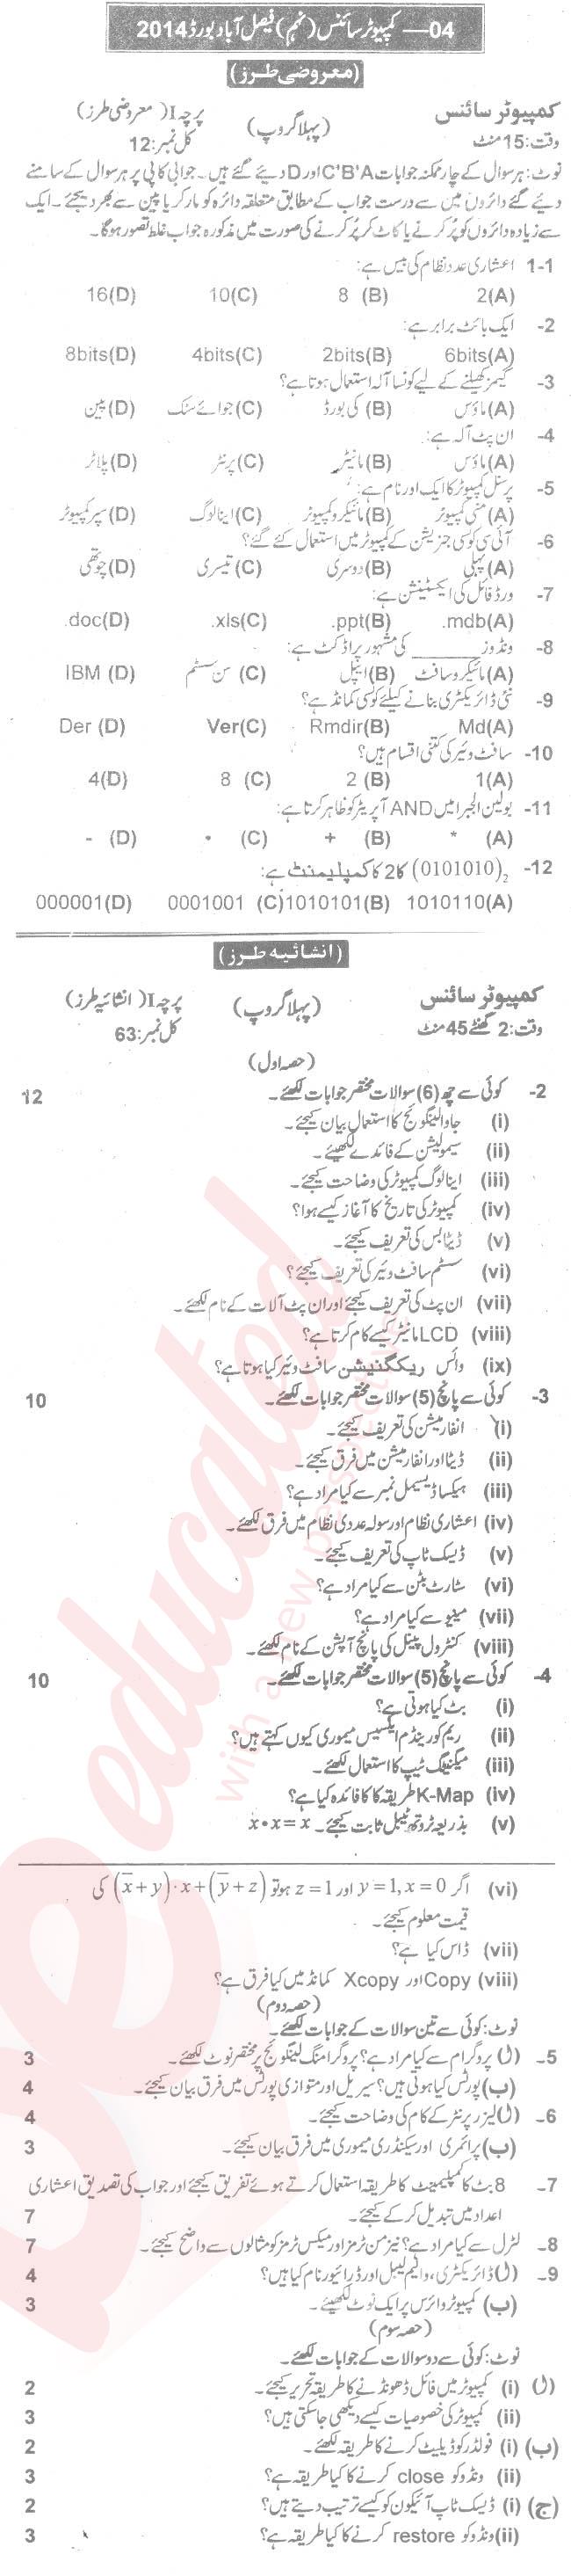 Computer Science 9th class Past Paper Group 1 BISE Faisalabad 2014